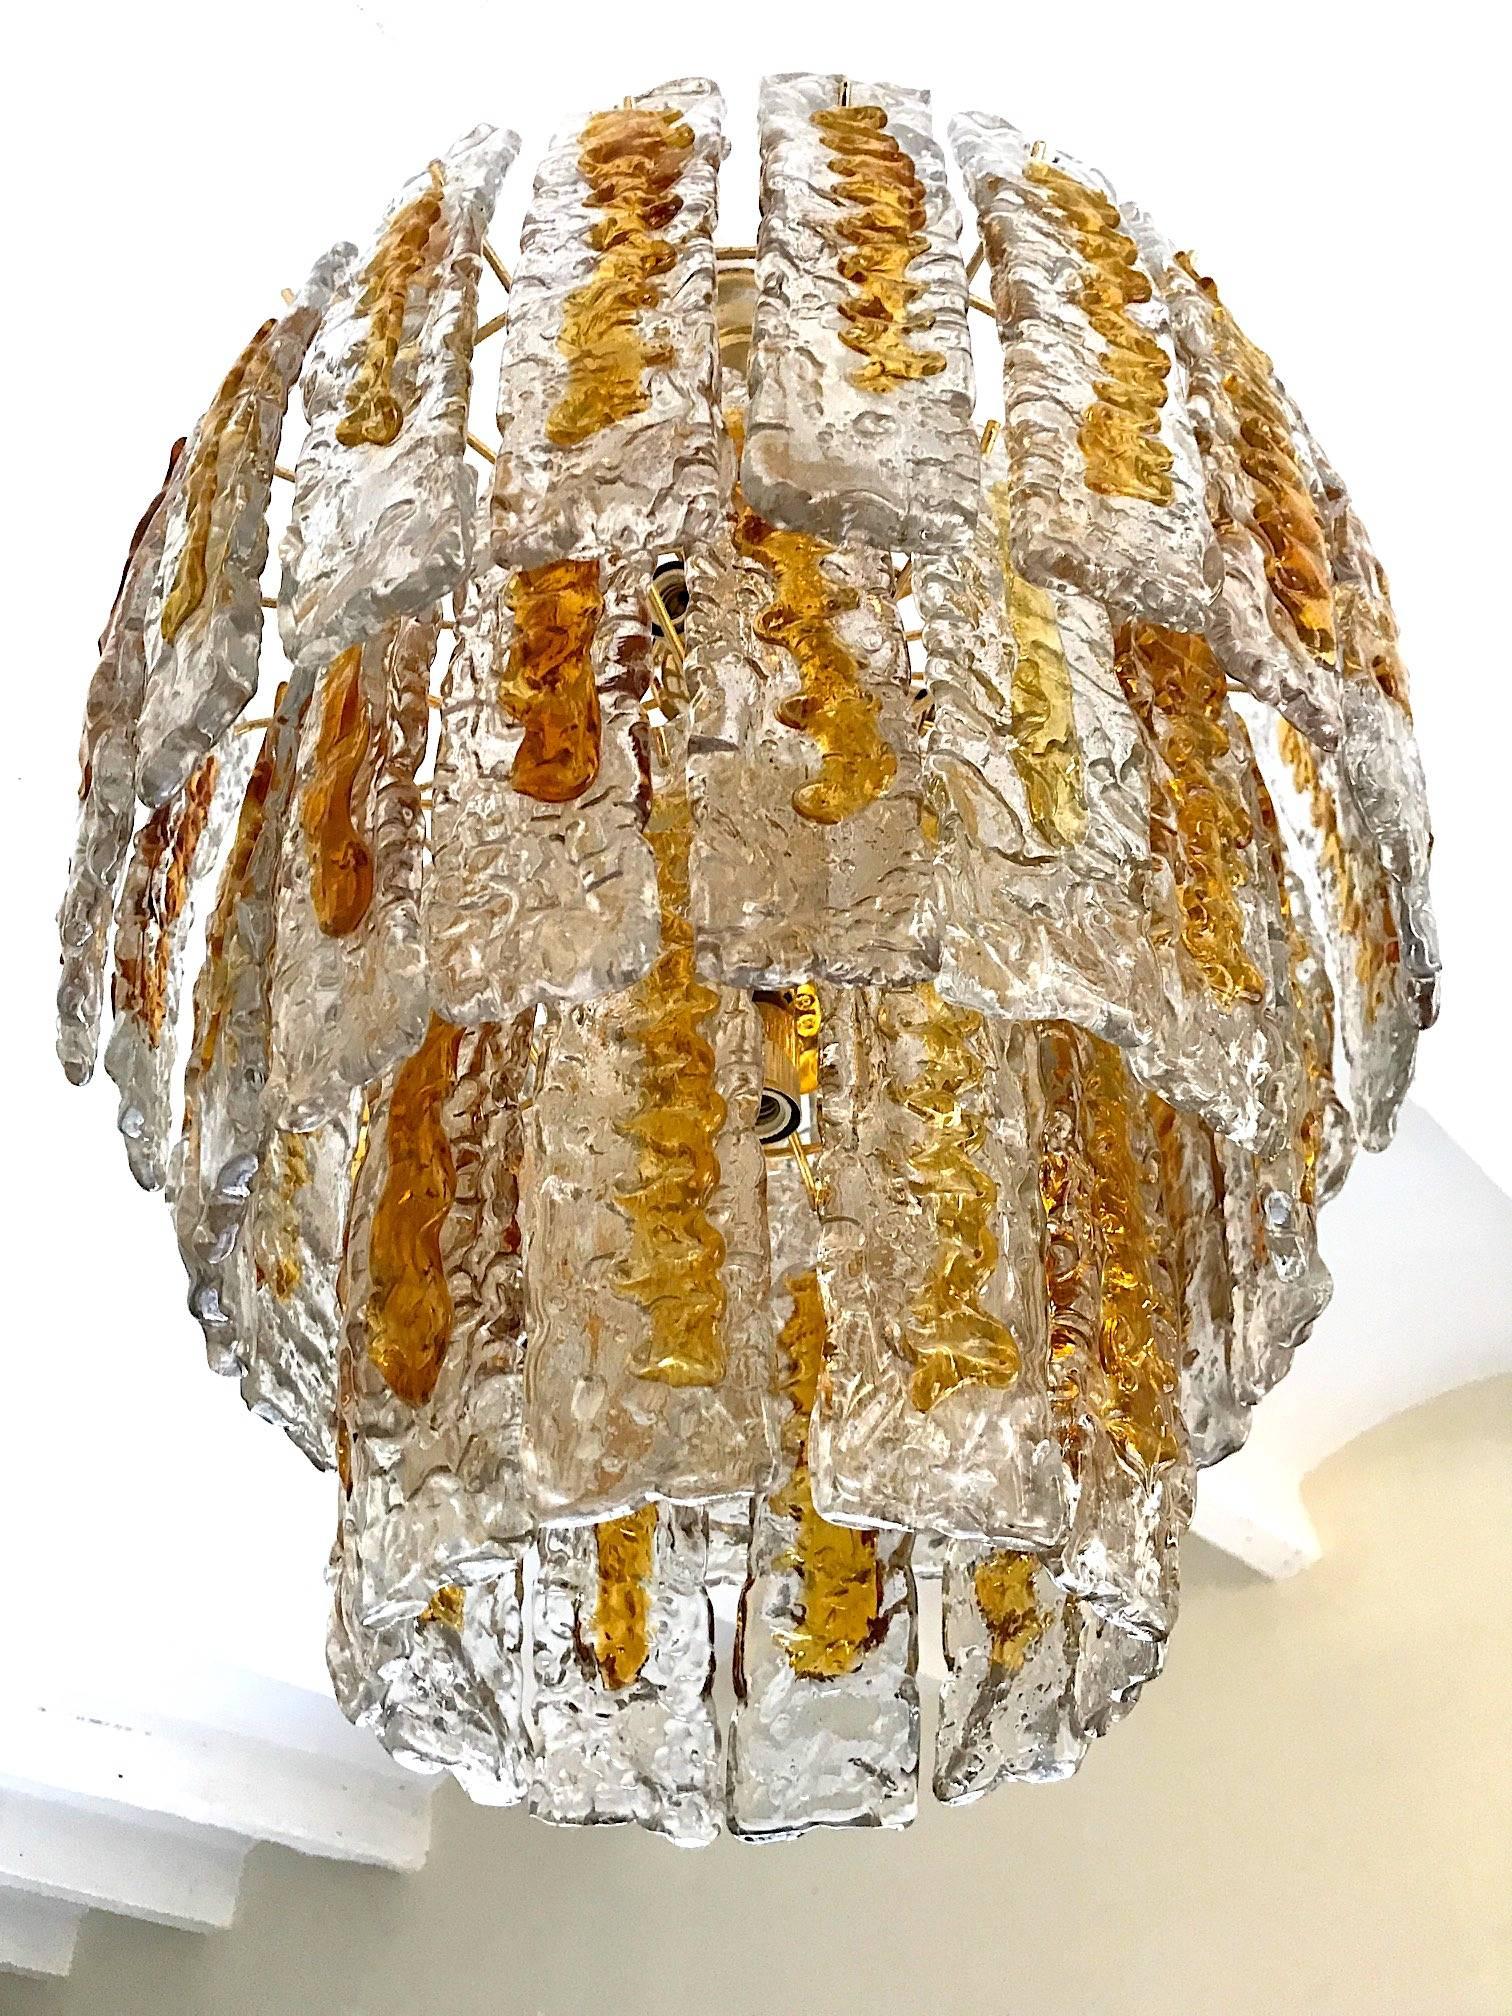 Italian Mid-Century Modern amber colored glass chandelier handblown in Murano by Mazzega. 
A real stunning ORIGINAL vintage period lamp !! Model made in hand-made by the greatest glassmakers (all offers are studied) to add the international shipping